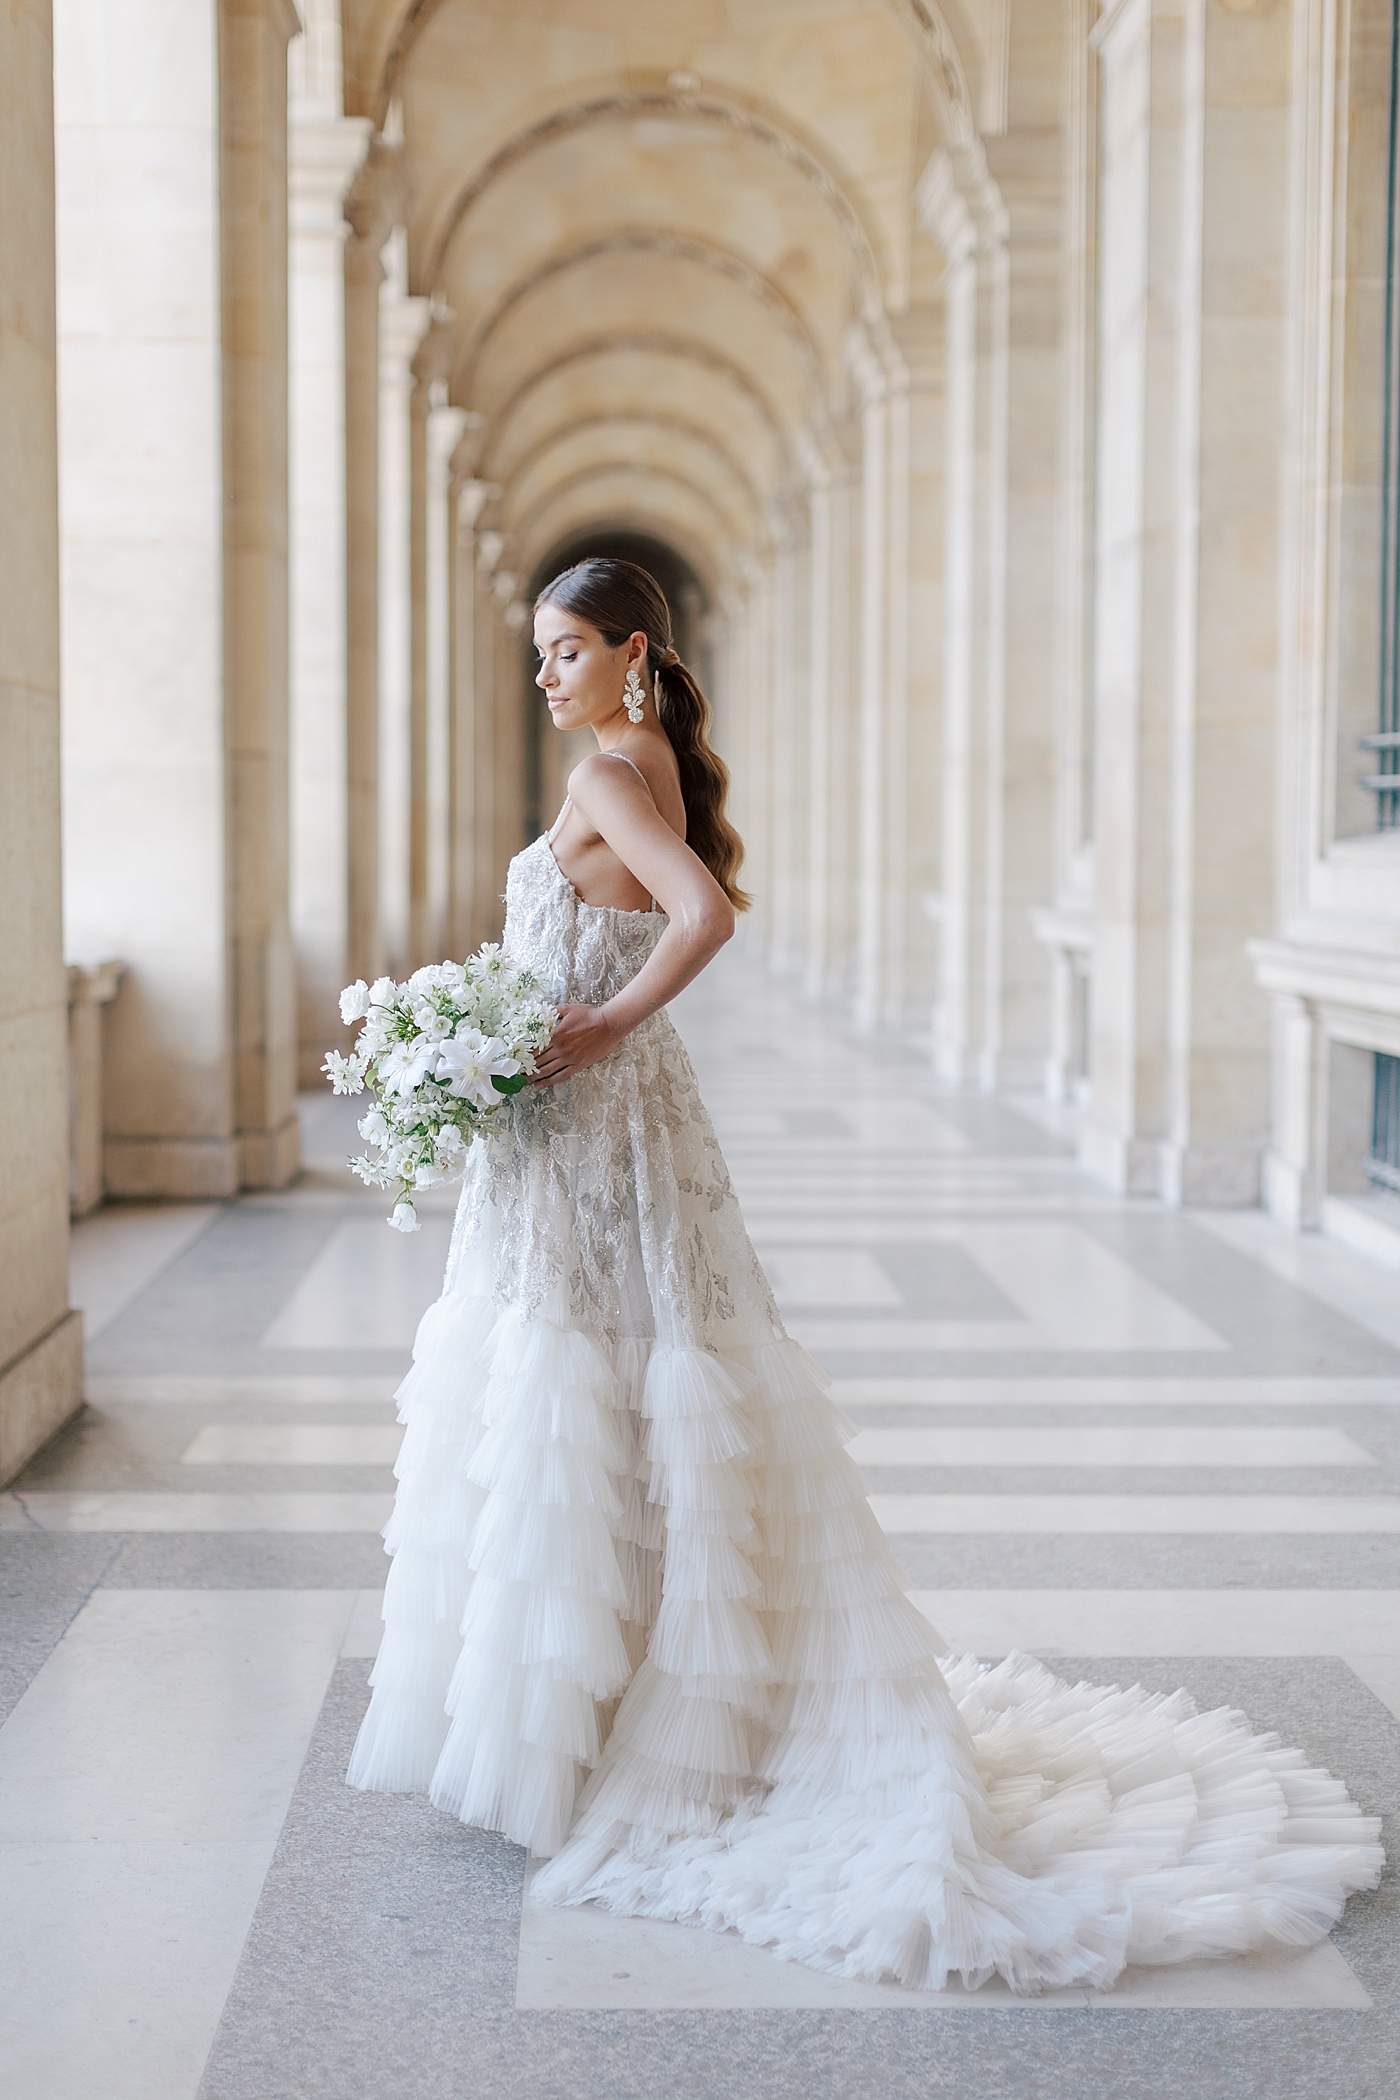 Bride standing in the outside hallway of the Louvre with a bouquet | Image by Hope Helmuth Photography